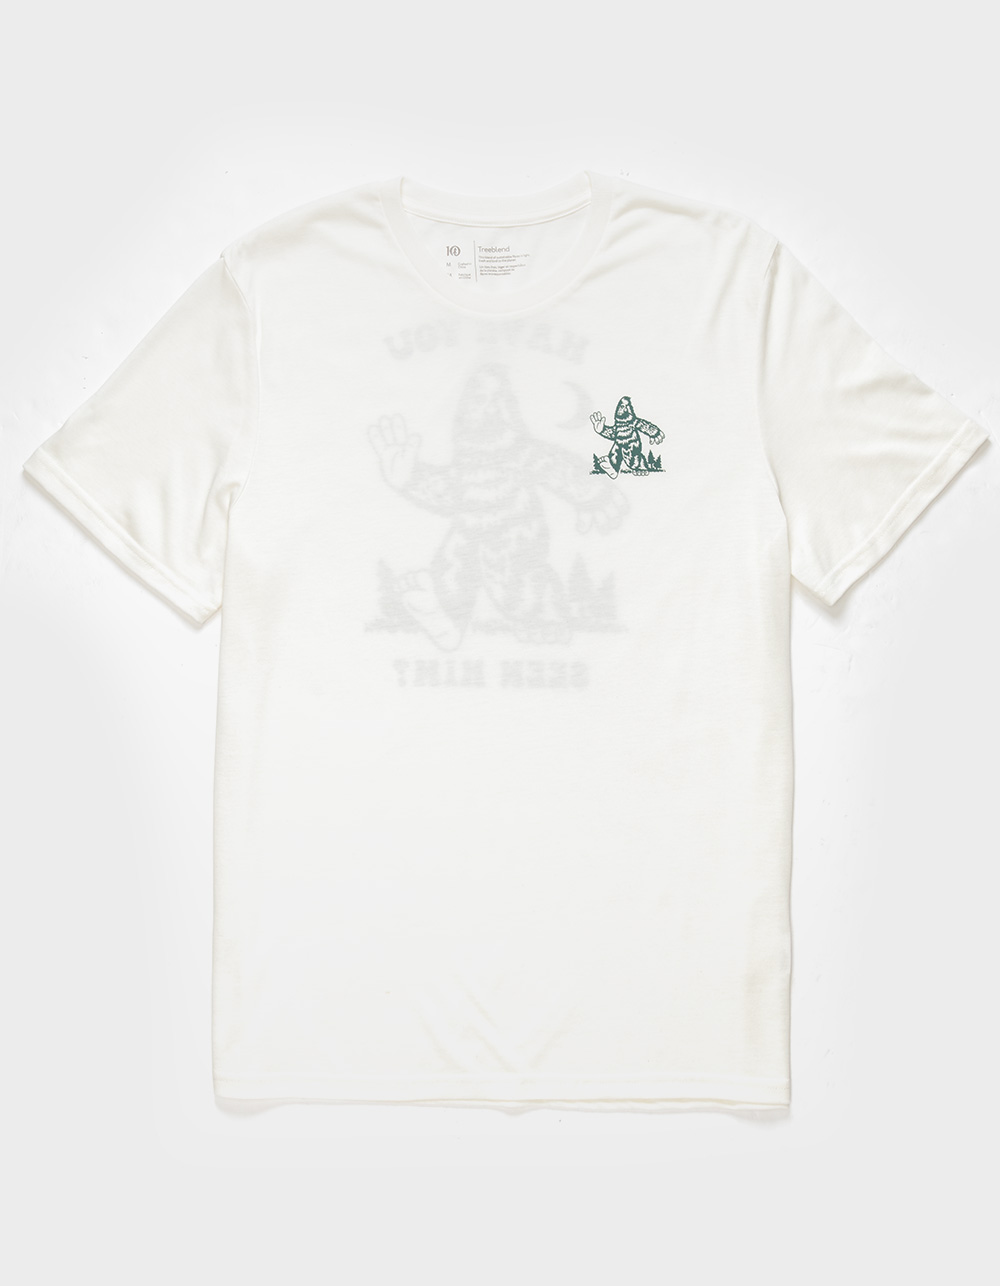 TENTREE Have You Seen Him Mens Tee - WHITE | Tillys